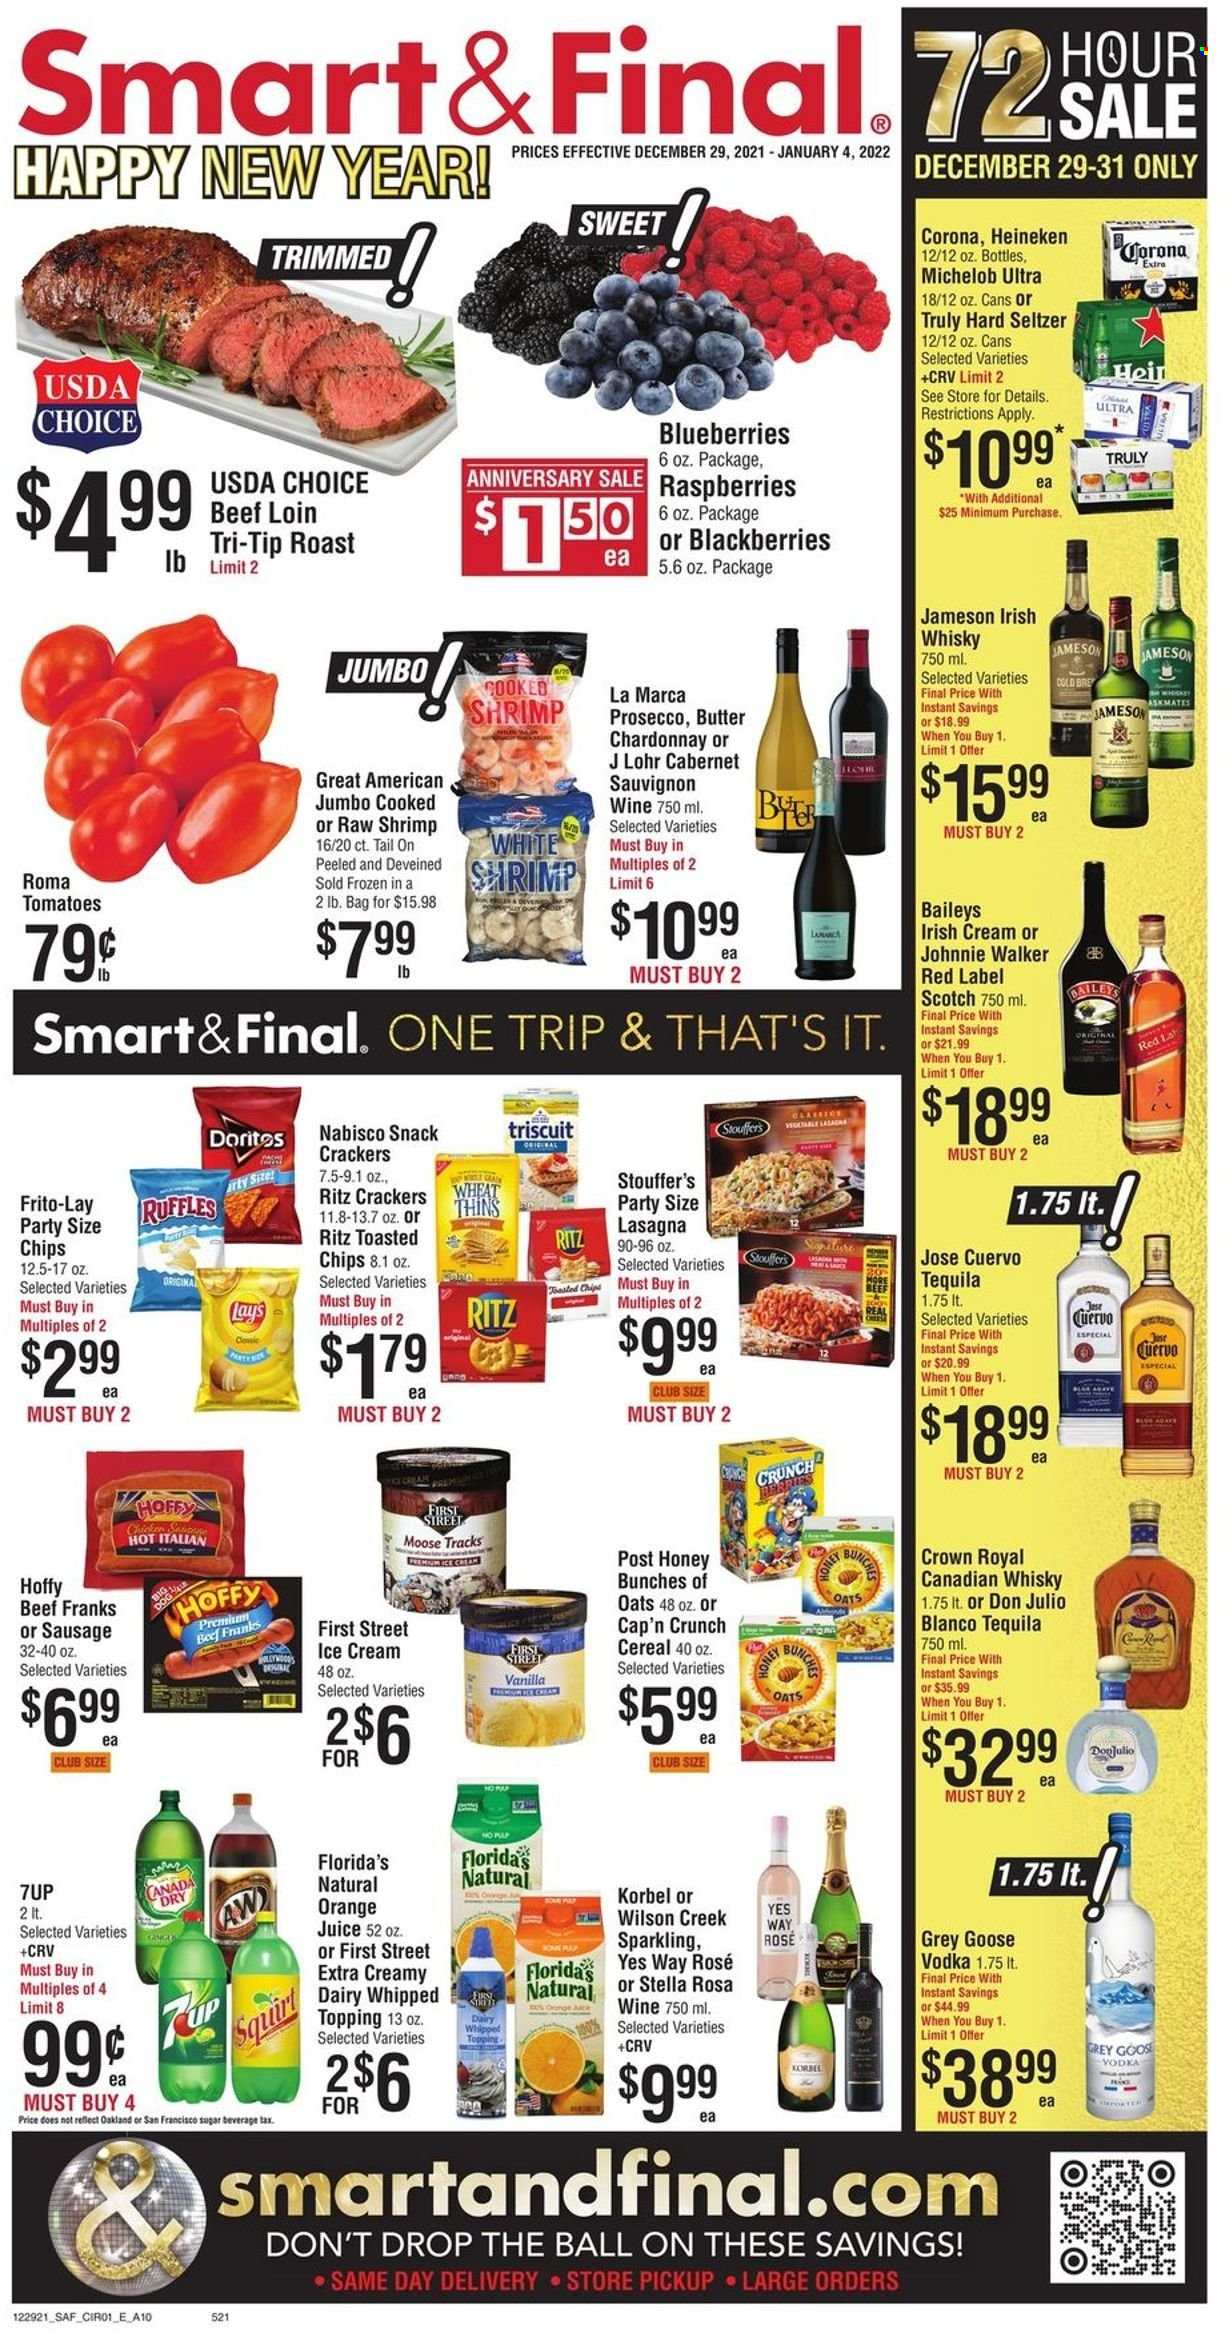 thumbnail - Smart & Final Flyer - 12/29/2021 - 01/04/2022 - Sales products - tomatoes, blueberries, shrimps, lasagna meal, sausage, butter, ice cream, Stouffer's, snack, crackers, Florida's Natural, RITZ, Lay’s, Thins, Frito-Lay, Ruffles, sugar, topping, cereals, Cap'n Crunch, orange juice, juice, 7UP, Cabernet Sauvignon, red wine, white wine, prosecco, Chardonnay, wine, rosé wine, canadian whisky, tequila, vodka, irish cream, Jameson, Baileys, Johnnie Walker, Hard Seltzer, TRULY, whisky, beer, Corona Extra, Heineken, Michelob. Page 1.